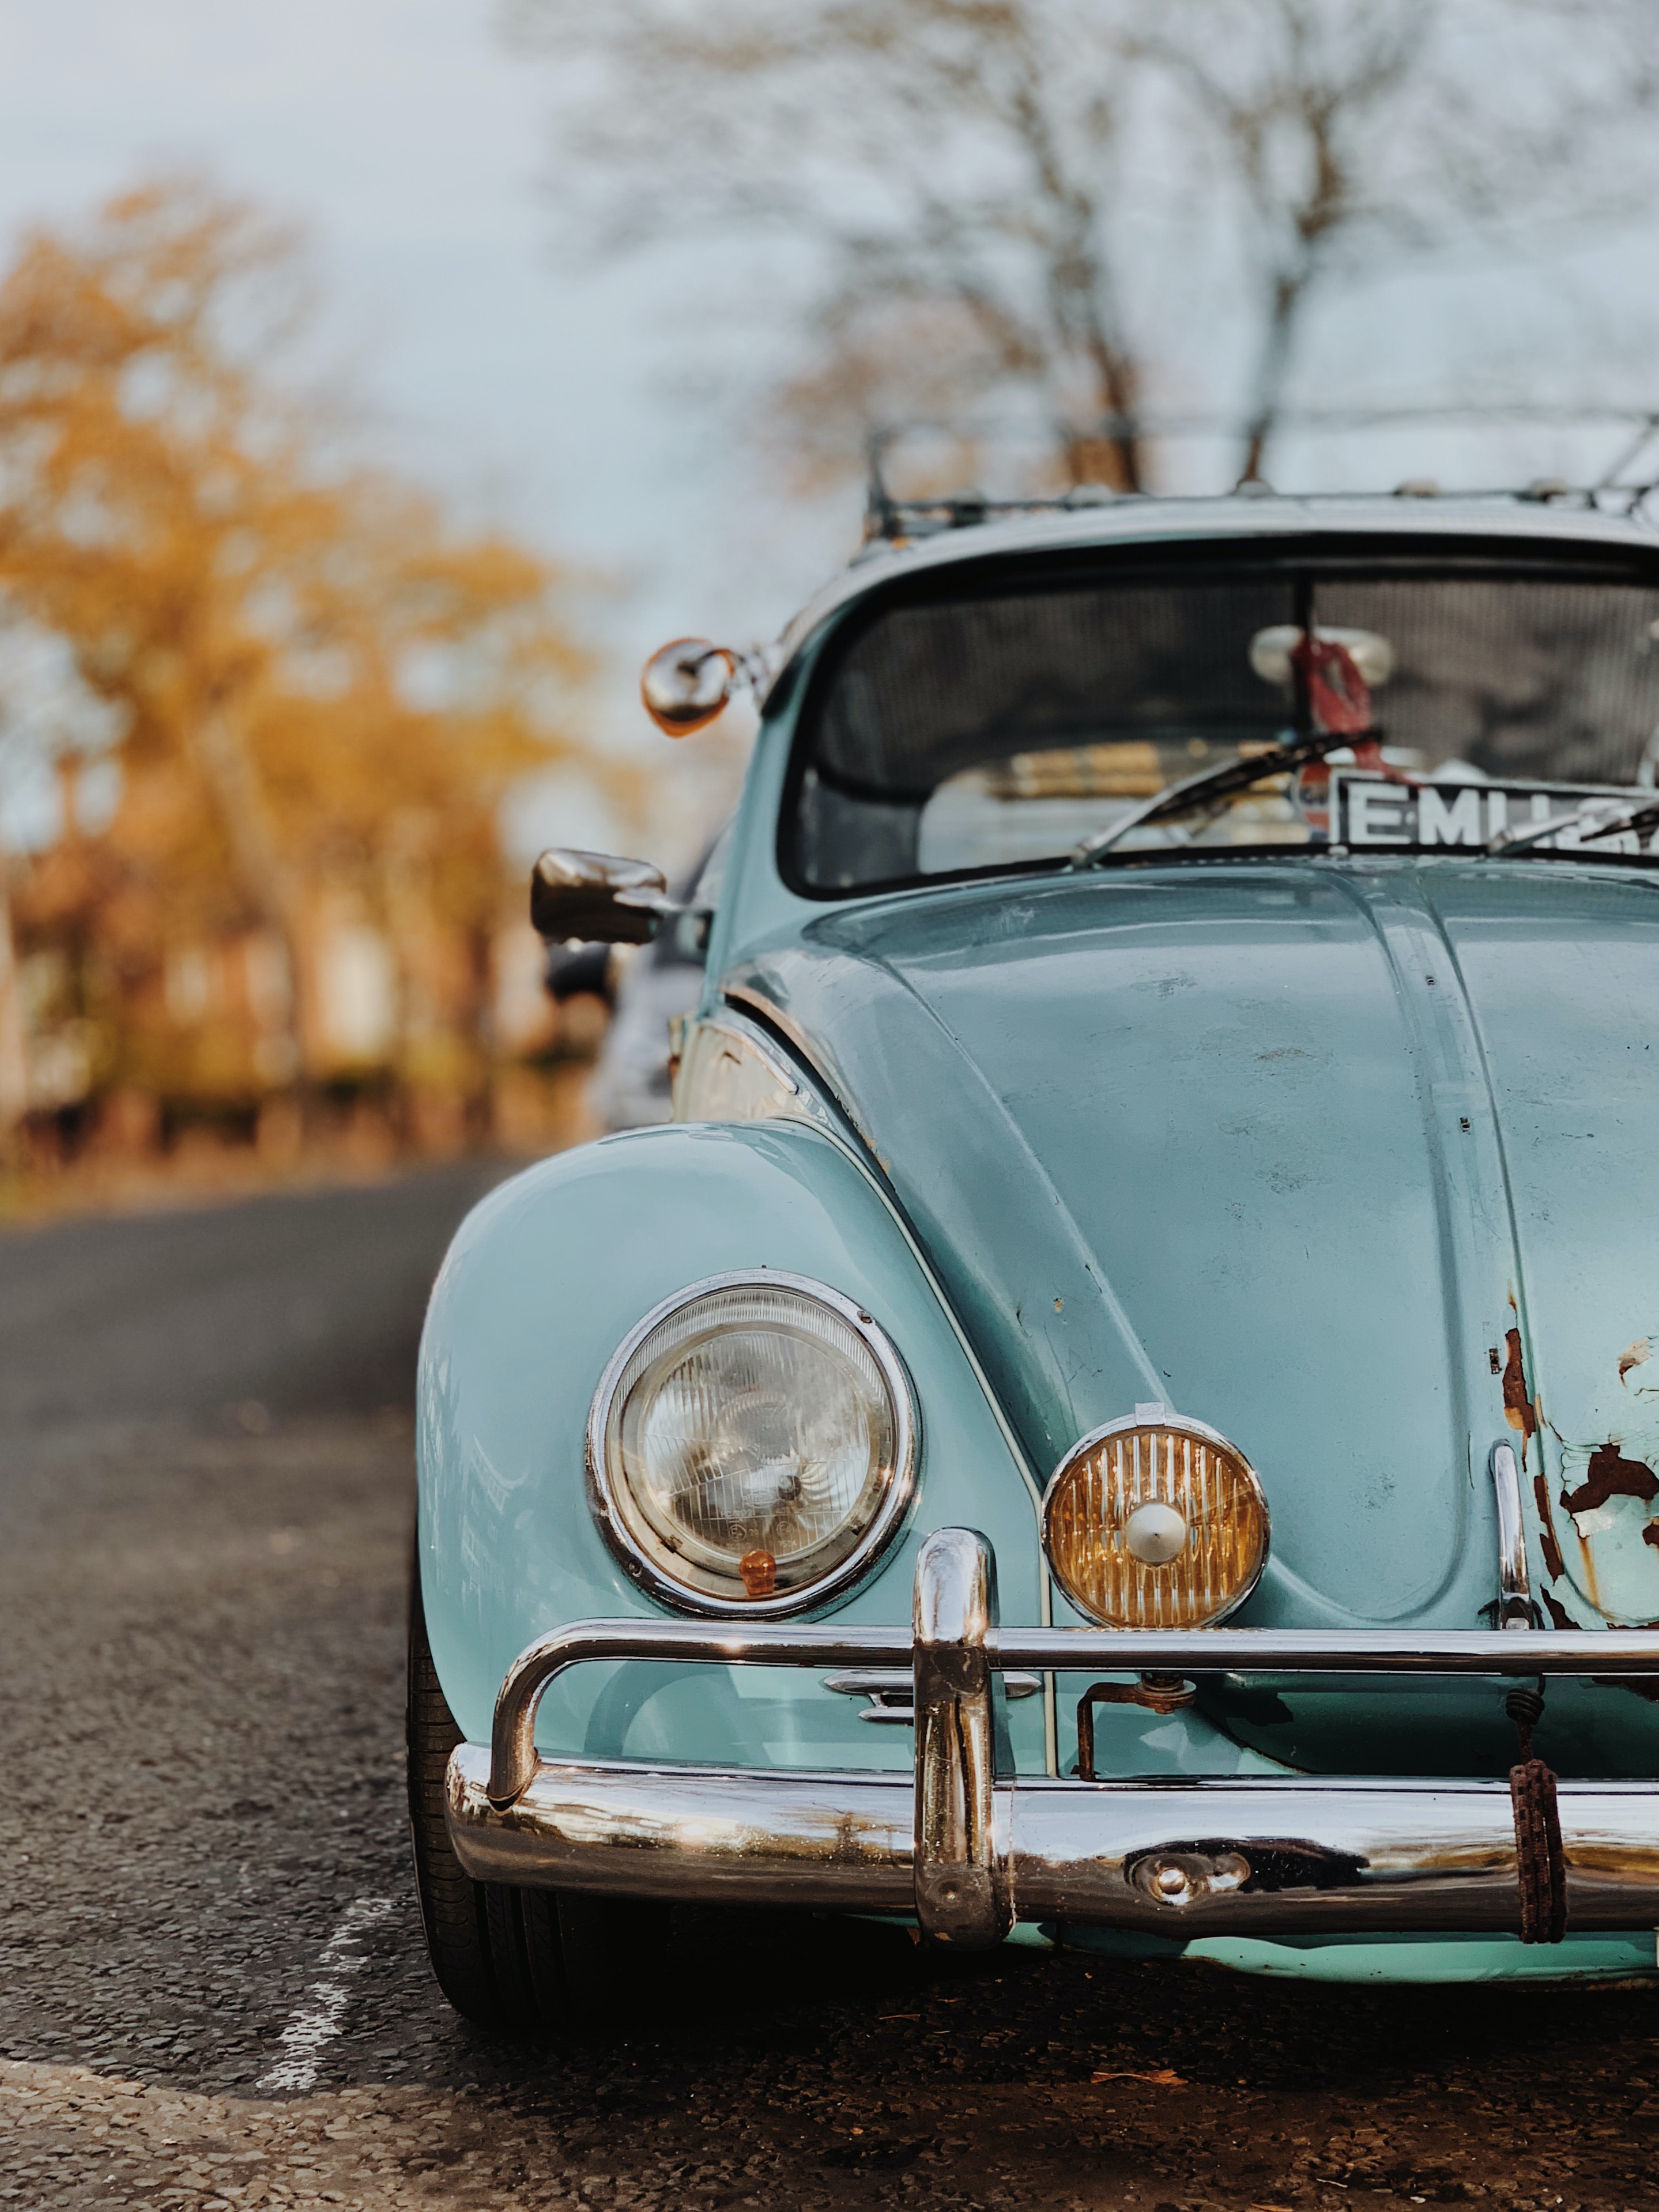 Tips for Getting the Most Money from Selling an Old Car